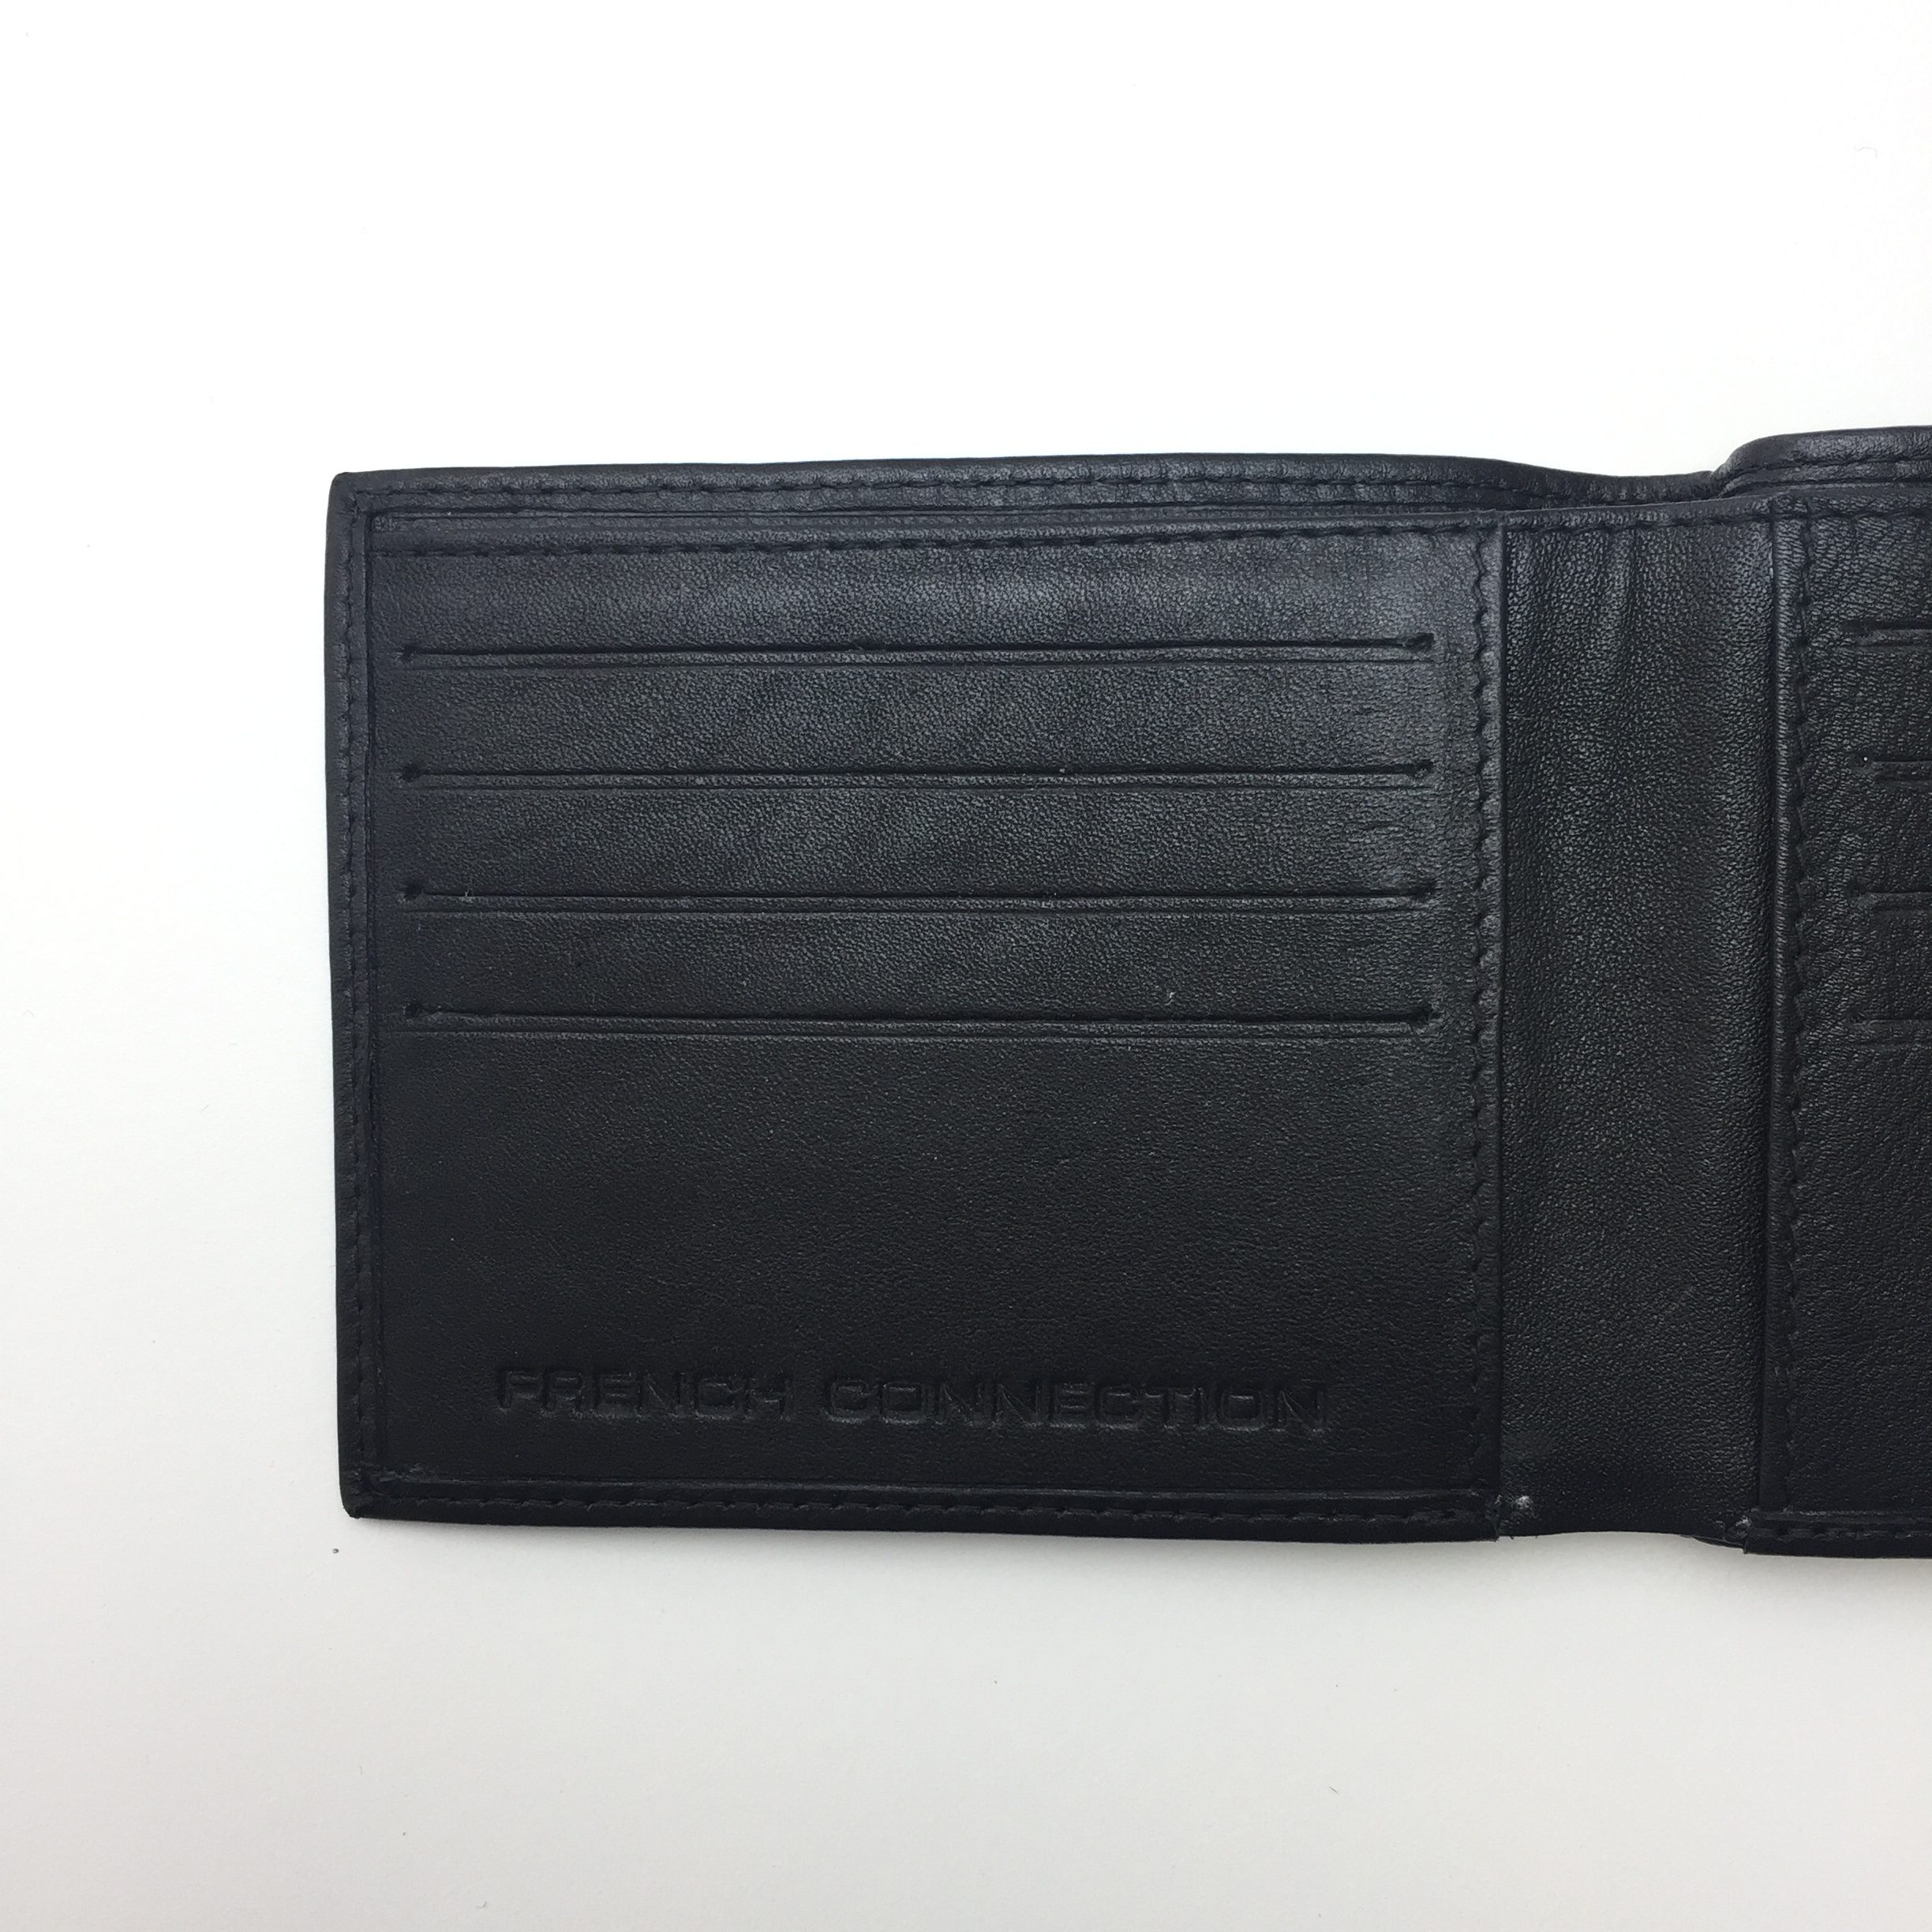 FRENCH CONNECTION – LEATHER WALLET (TR3ZI) – BLACK | Stylianou